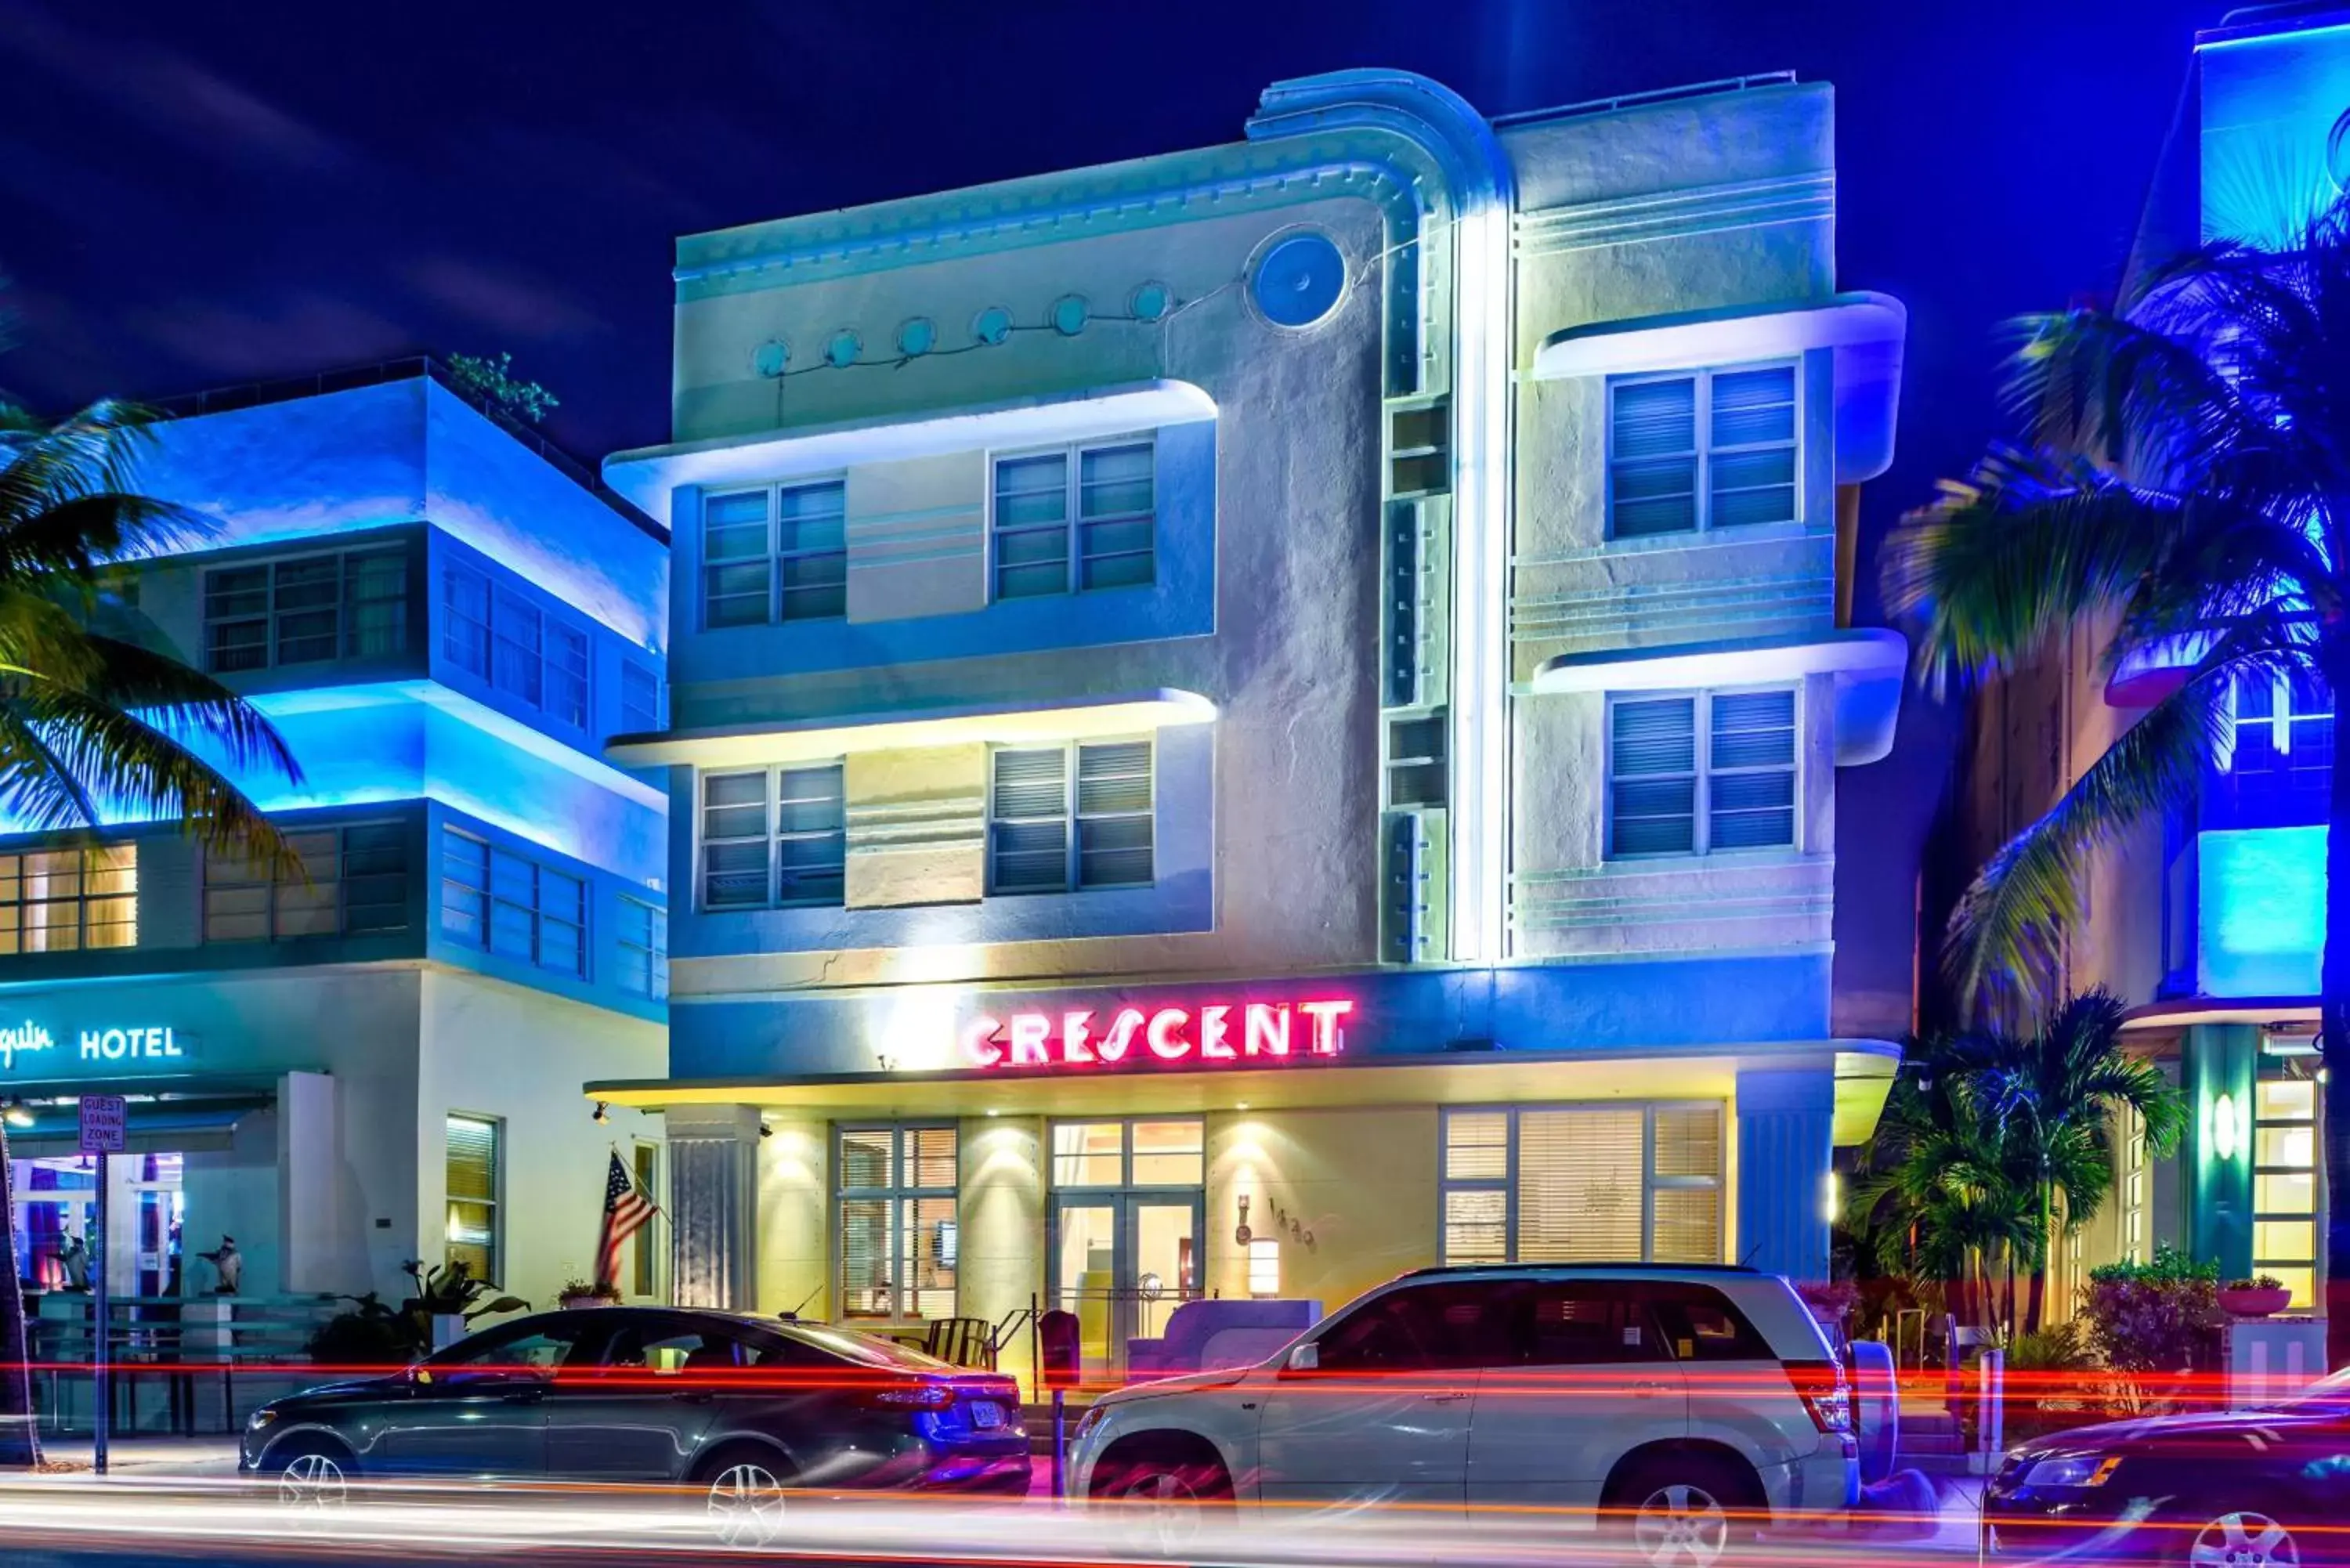 Property Building in Hilton Vacation Club Crescent on South Beach Miami